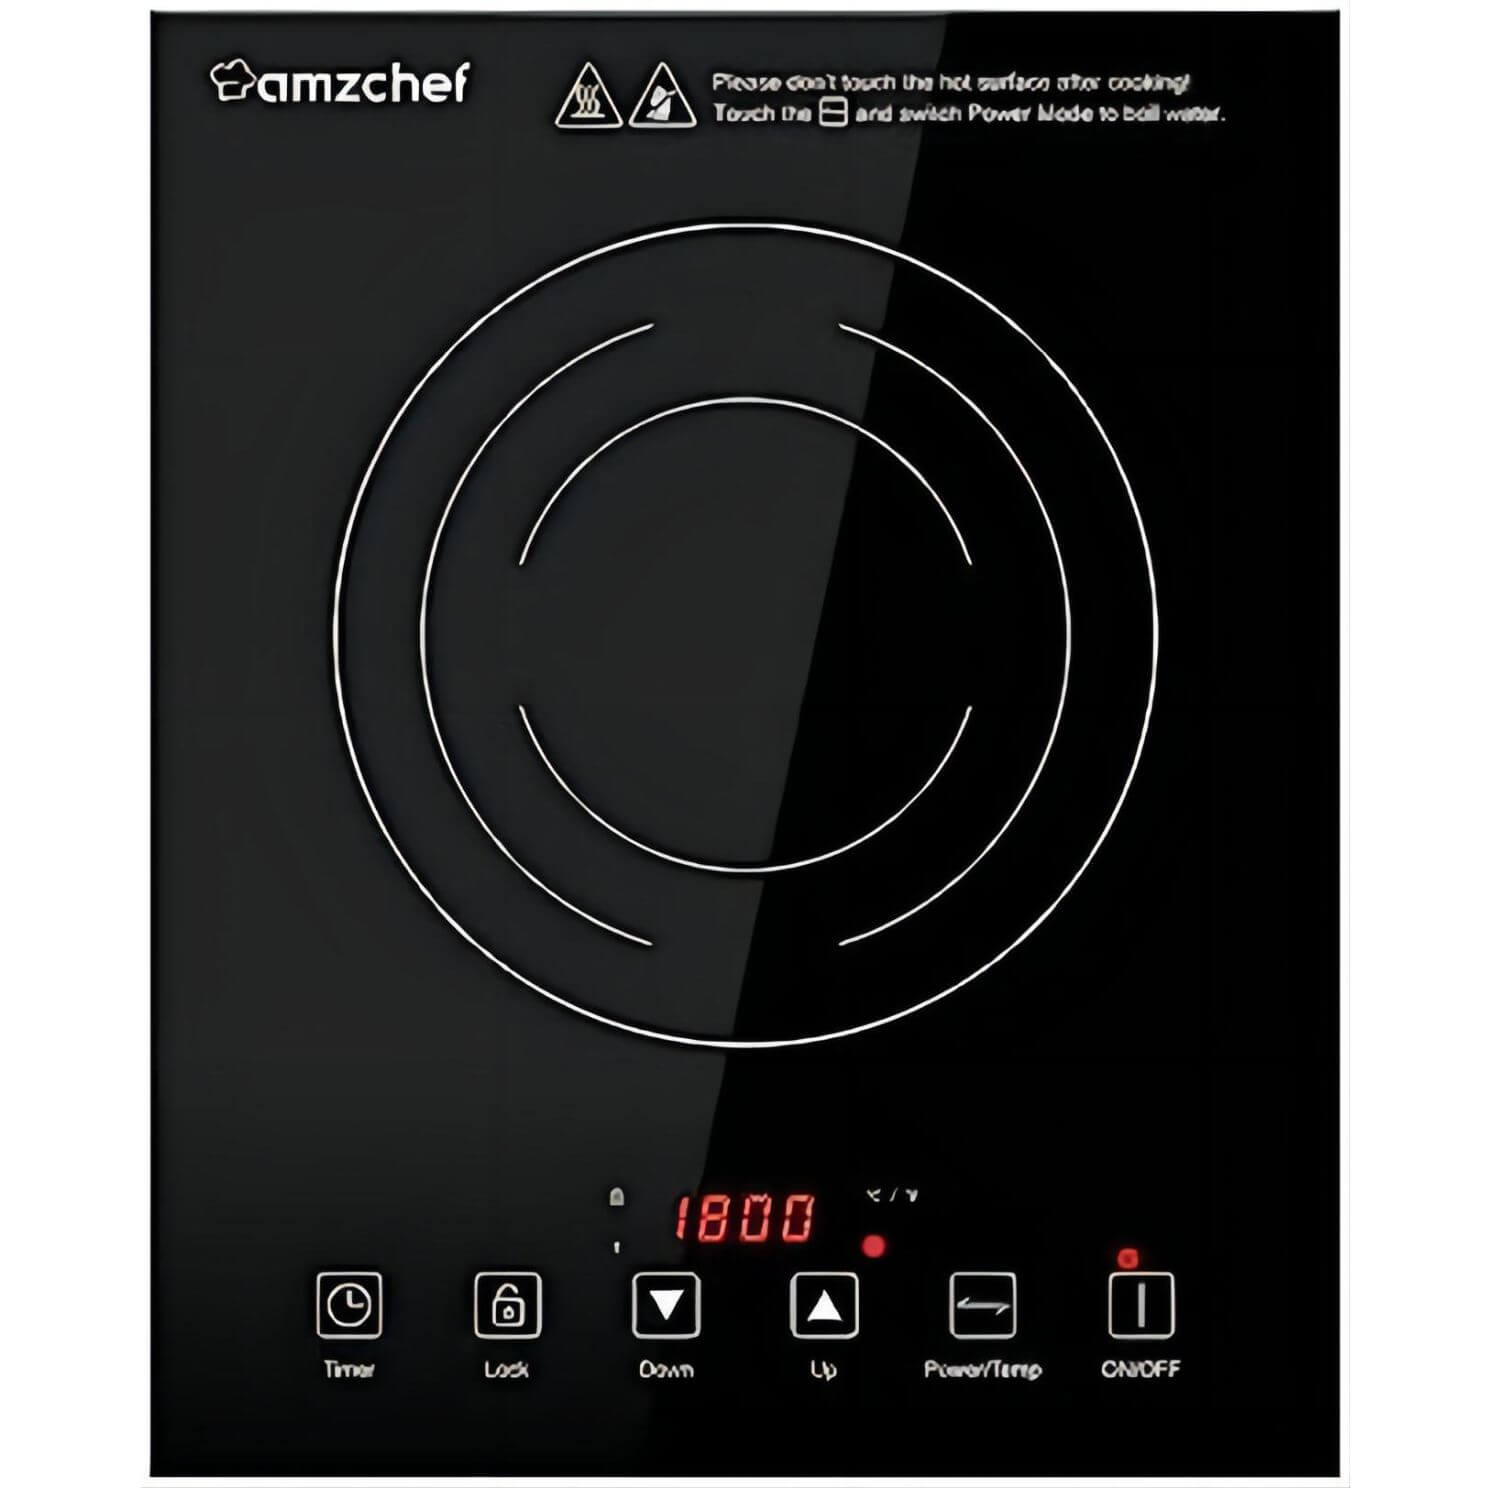 AMZCHEF Induction Cooktop Portable 1800W for RV